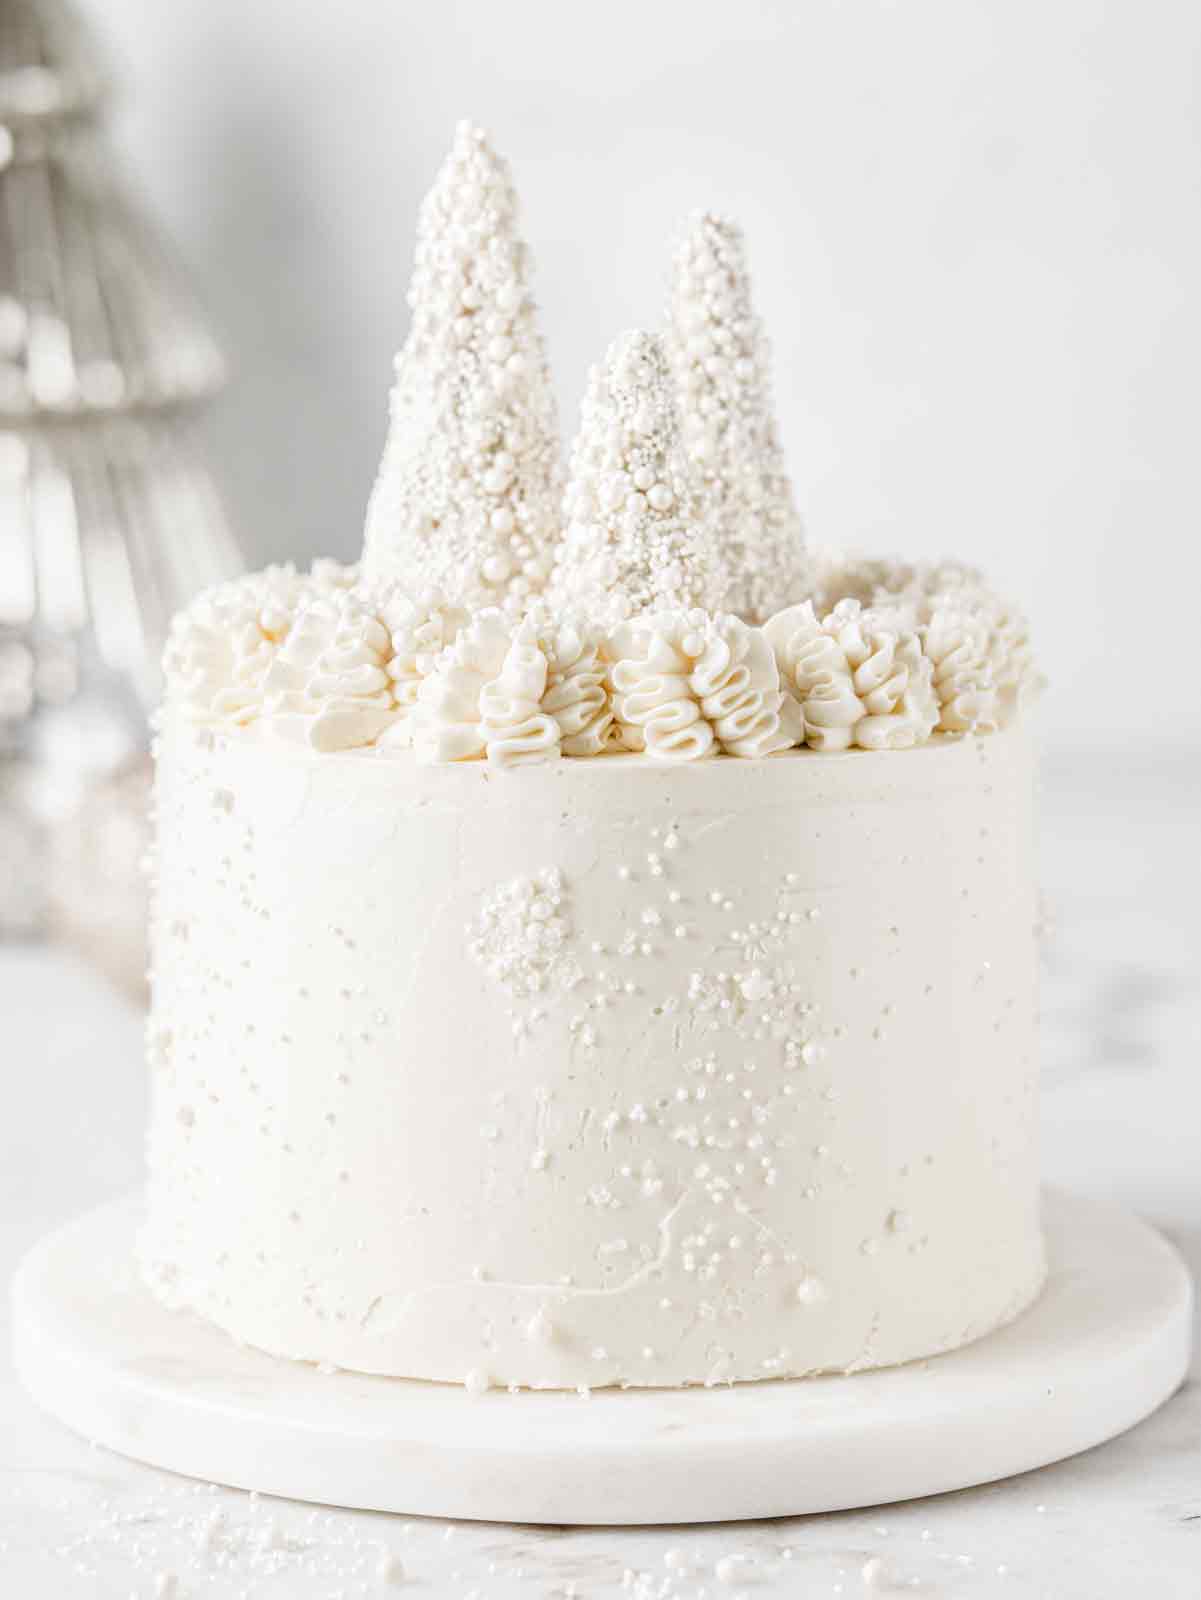 White cake on marble board with glittery trees on top.